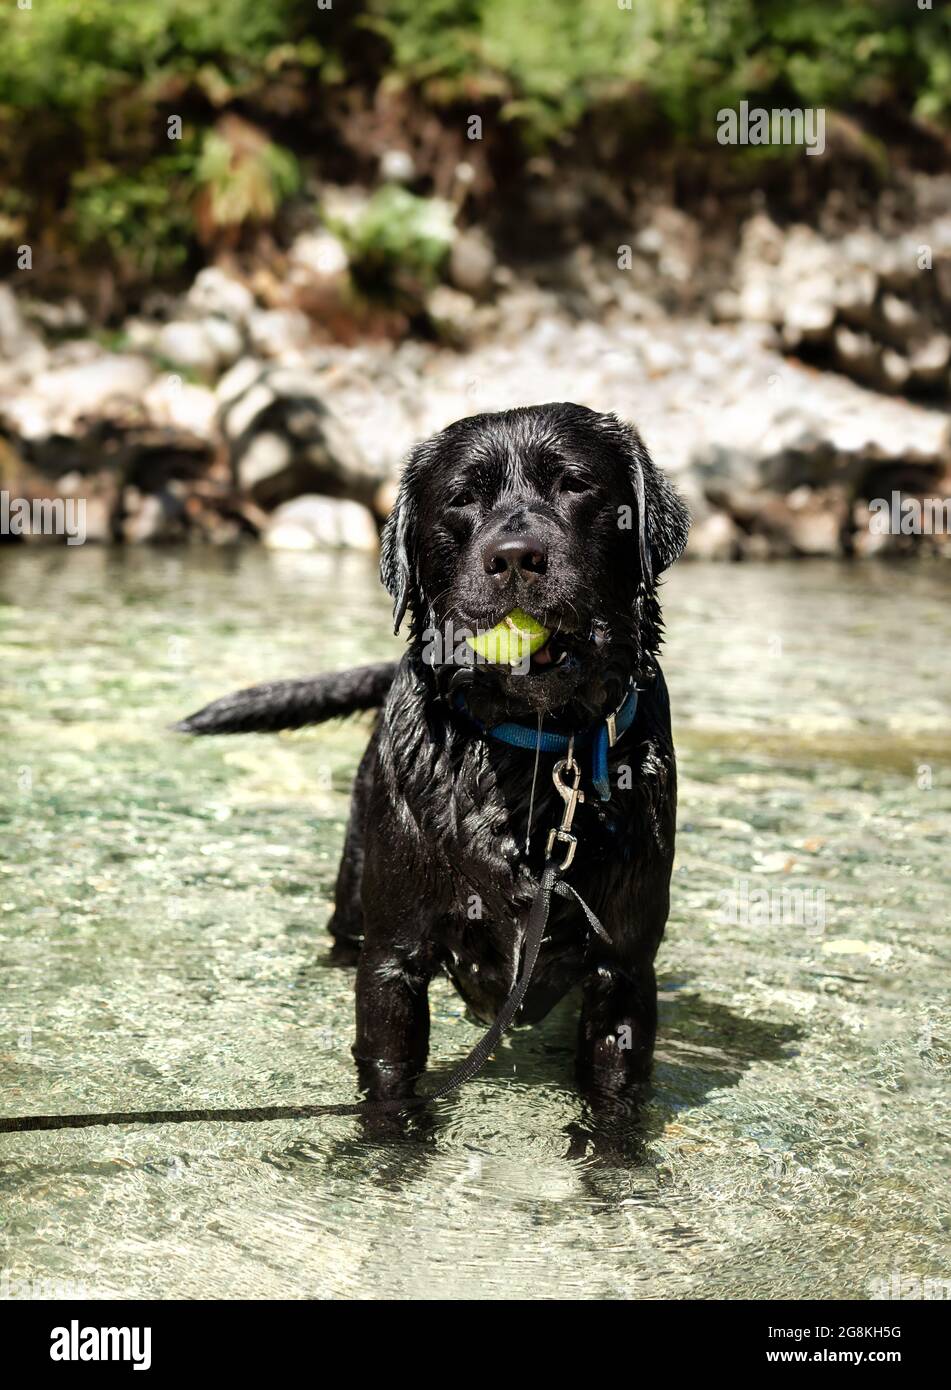 Dog standing in the river with tennis ball in mouth and dripping wet fur. Large black male English Labrador dog fetching and swimming in the water. Se Stock Photo